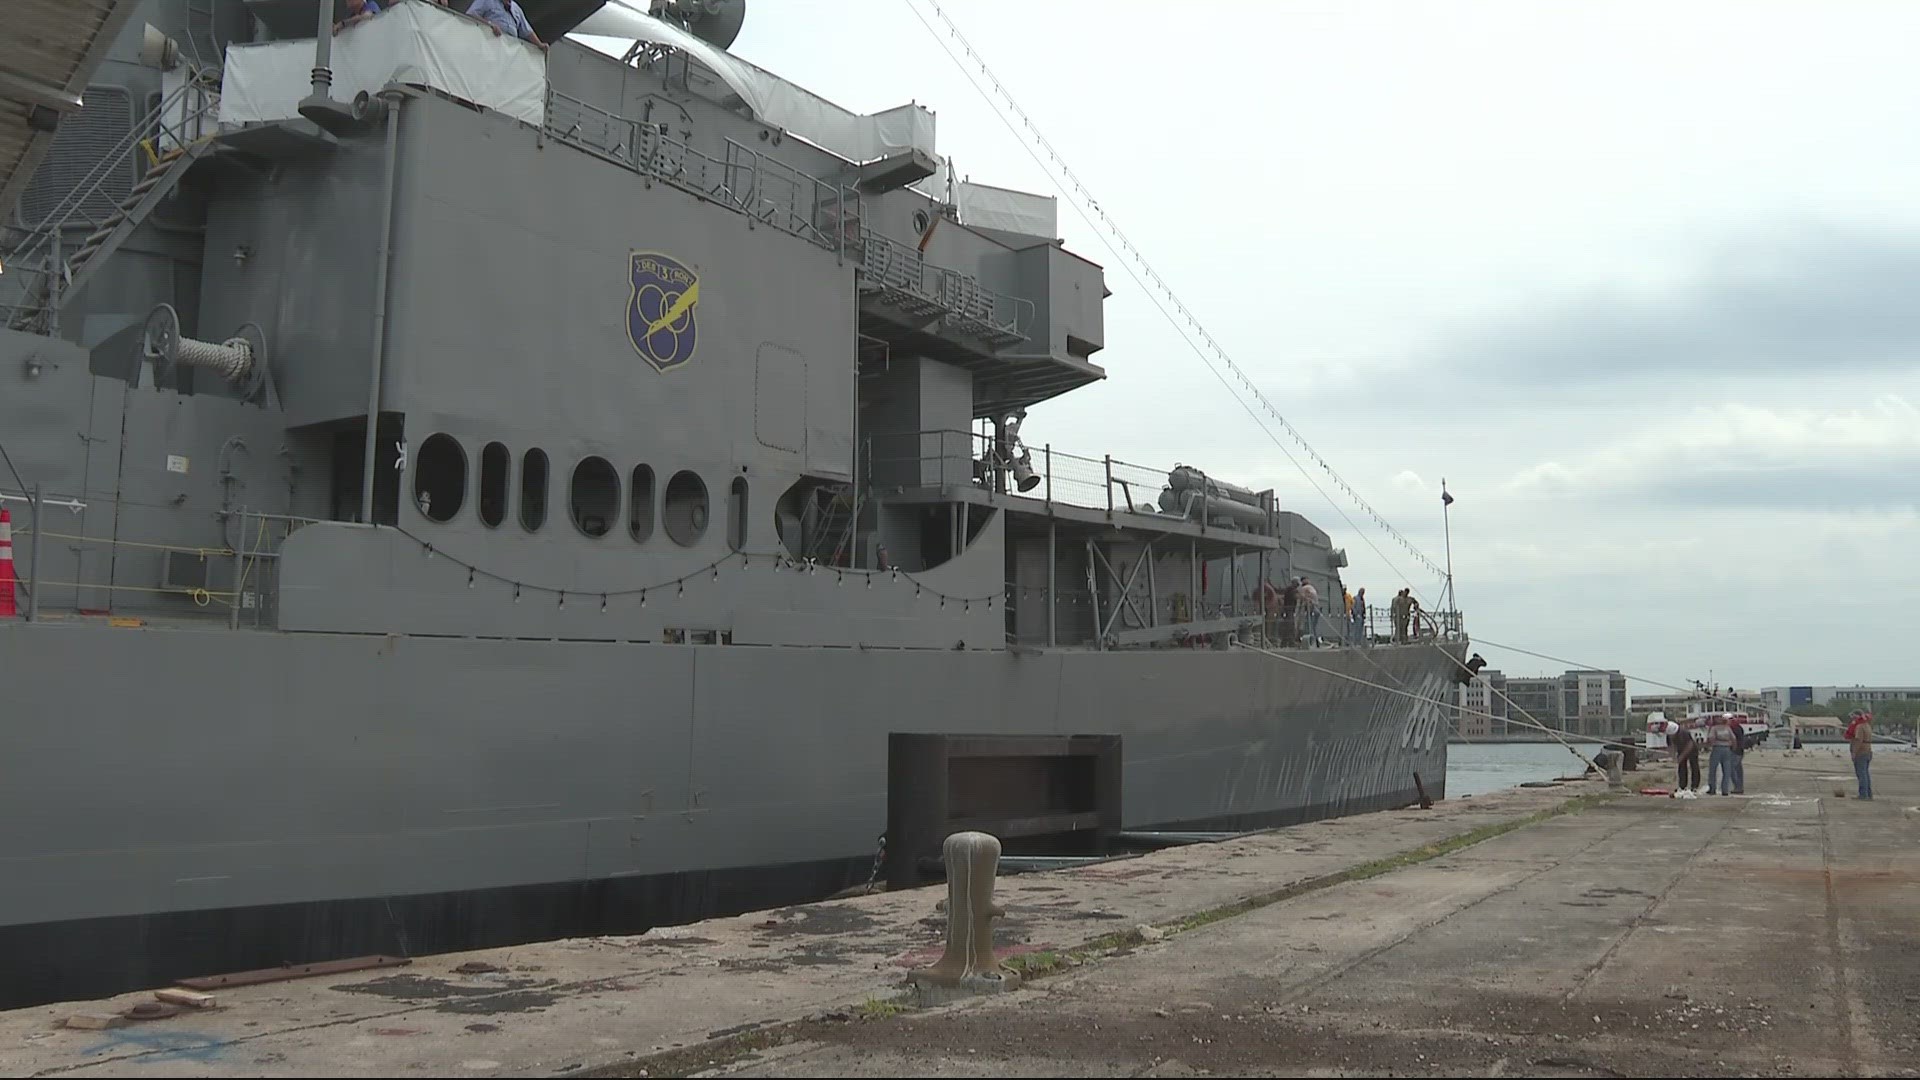 Our news crew rode along down the St. Johns River as the USS Orleck moved to its new home on Bay Street.